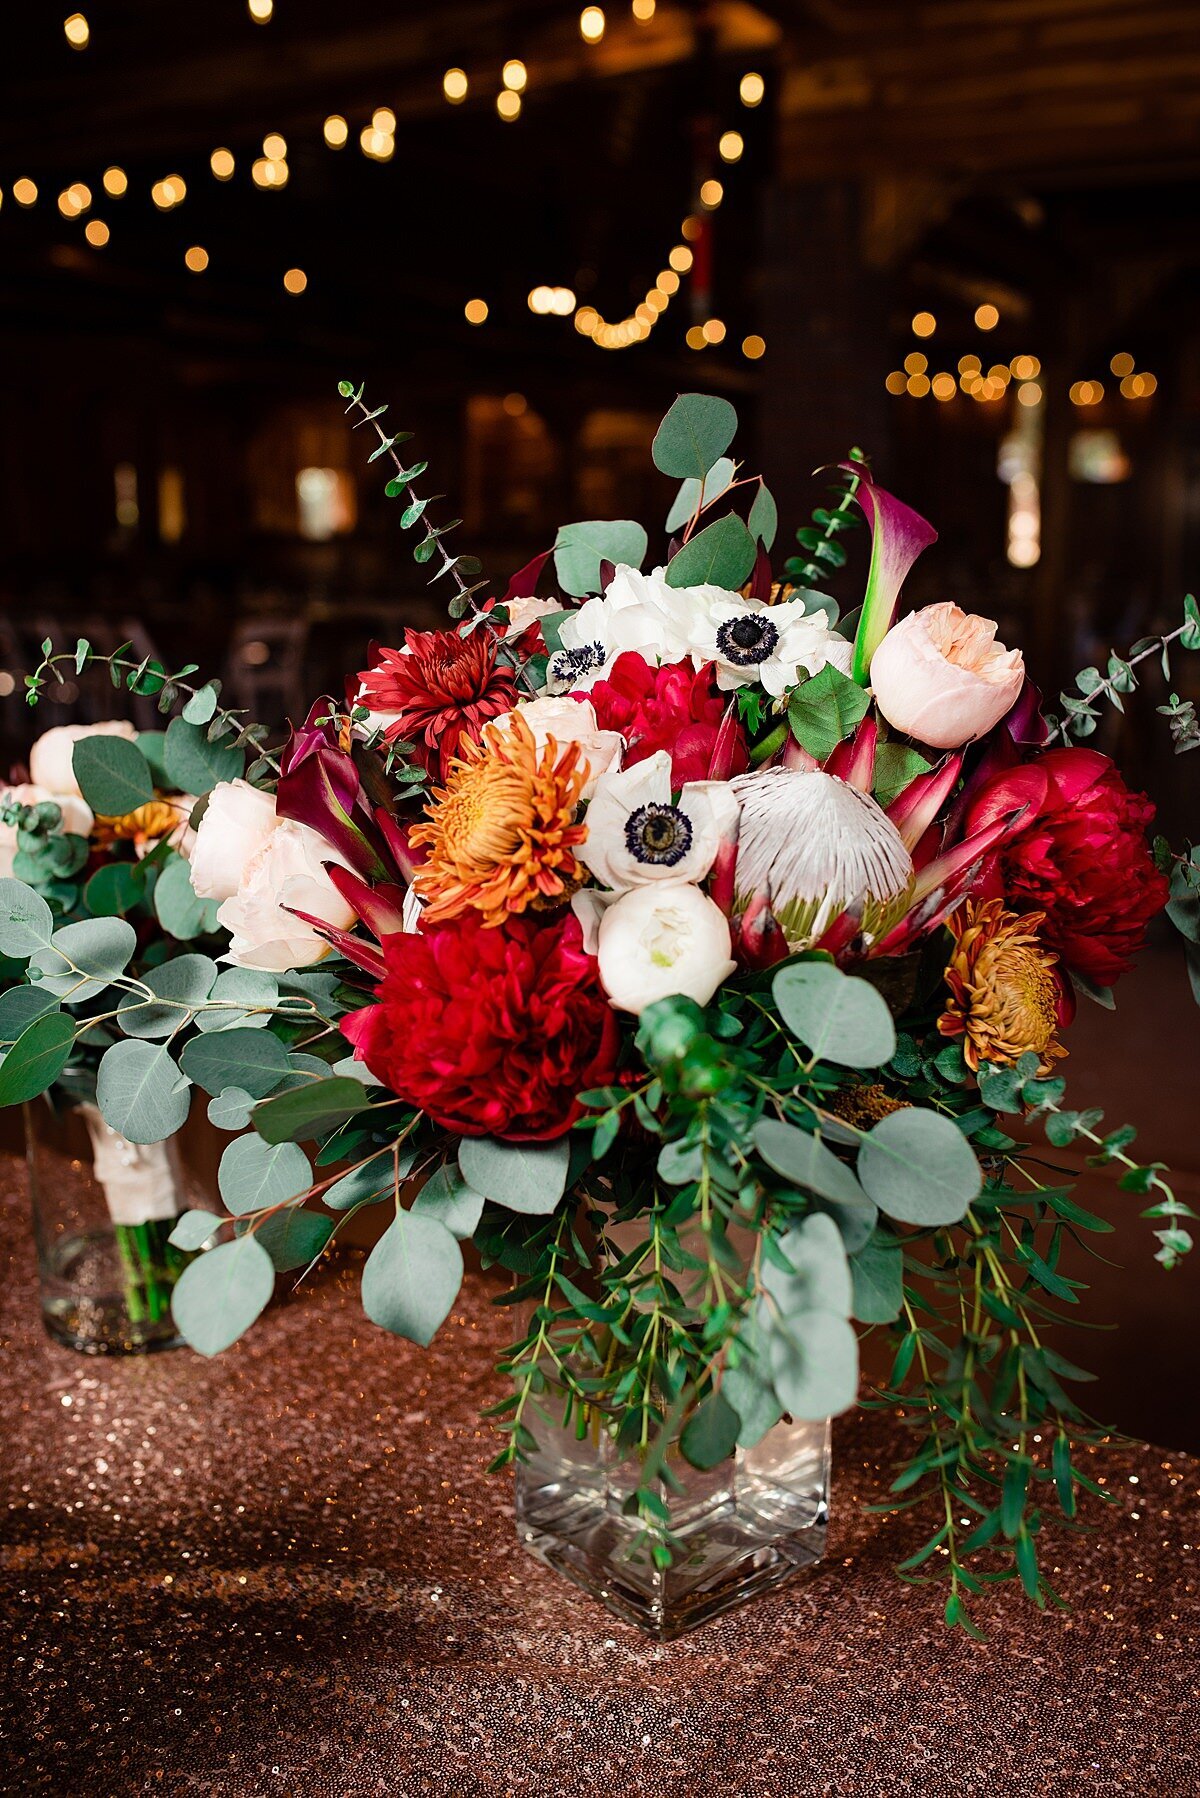 Large bride bouquet with protea, anemone, roses, birds of paradise, and other orange, red, and white flowers